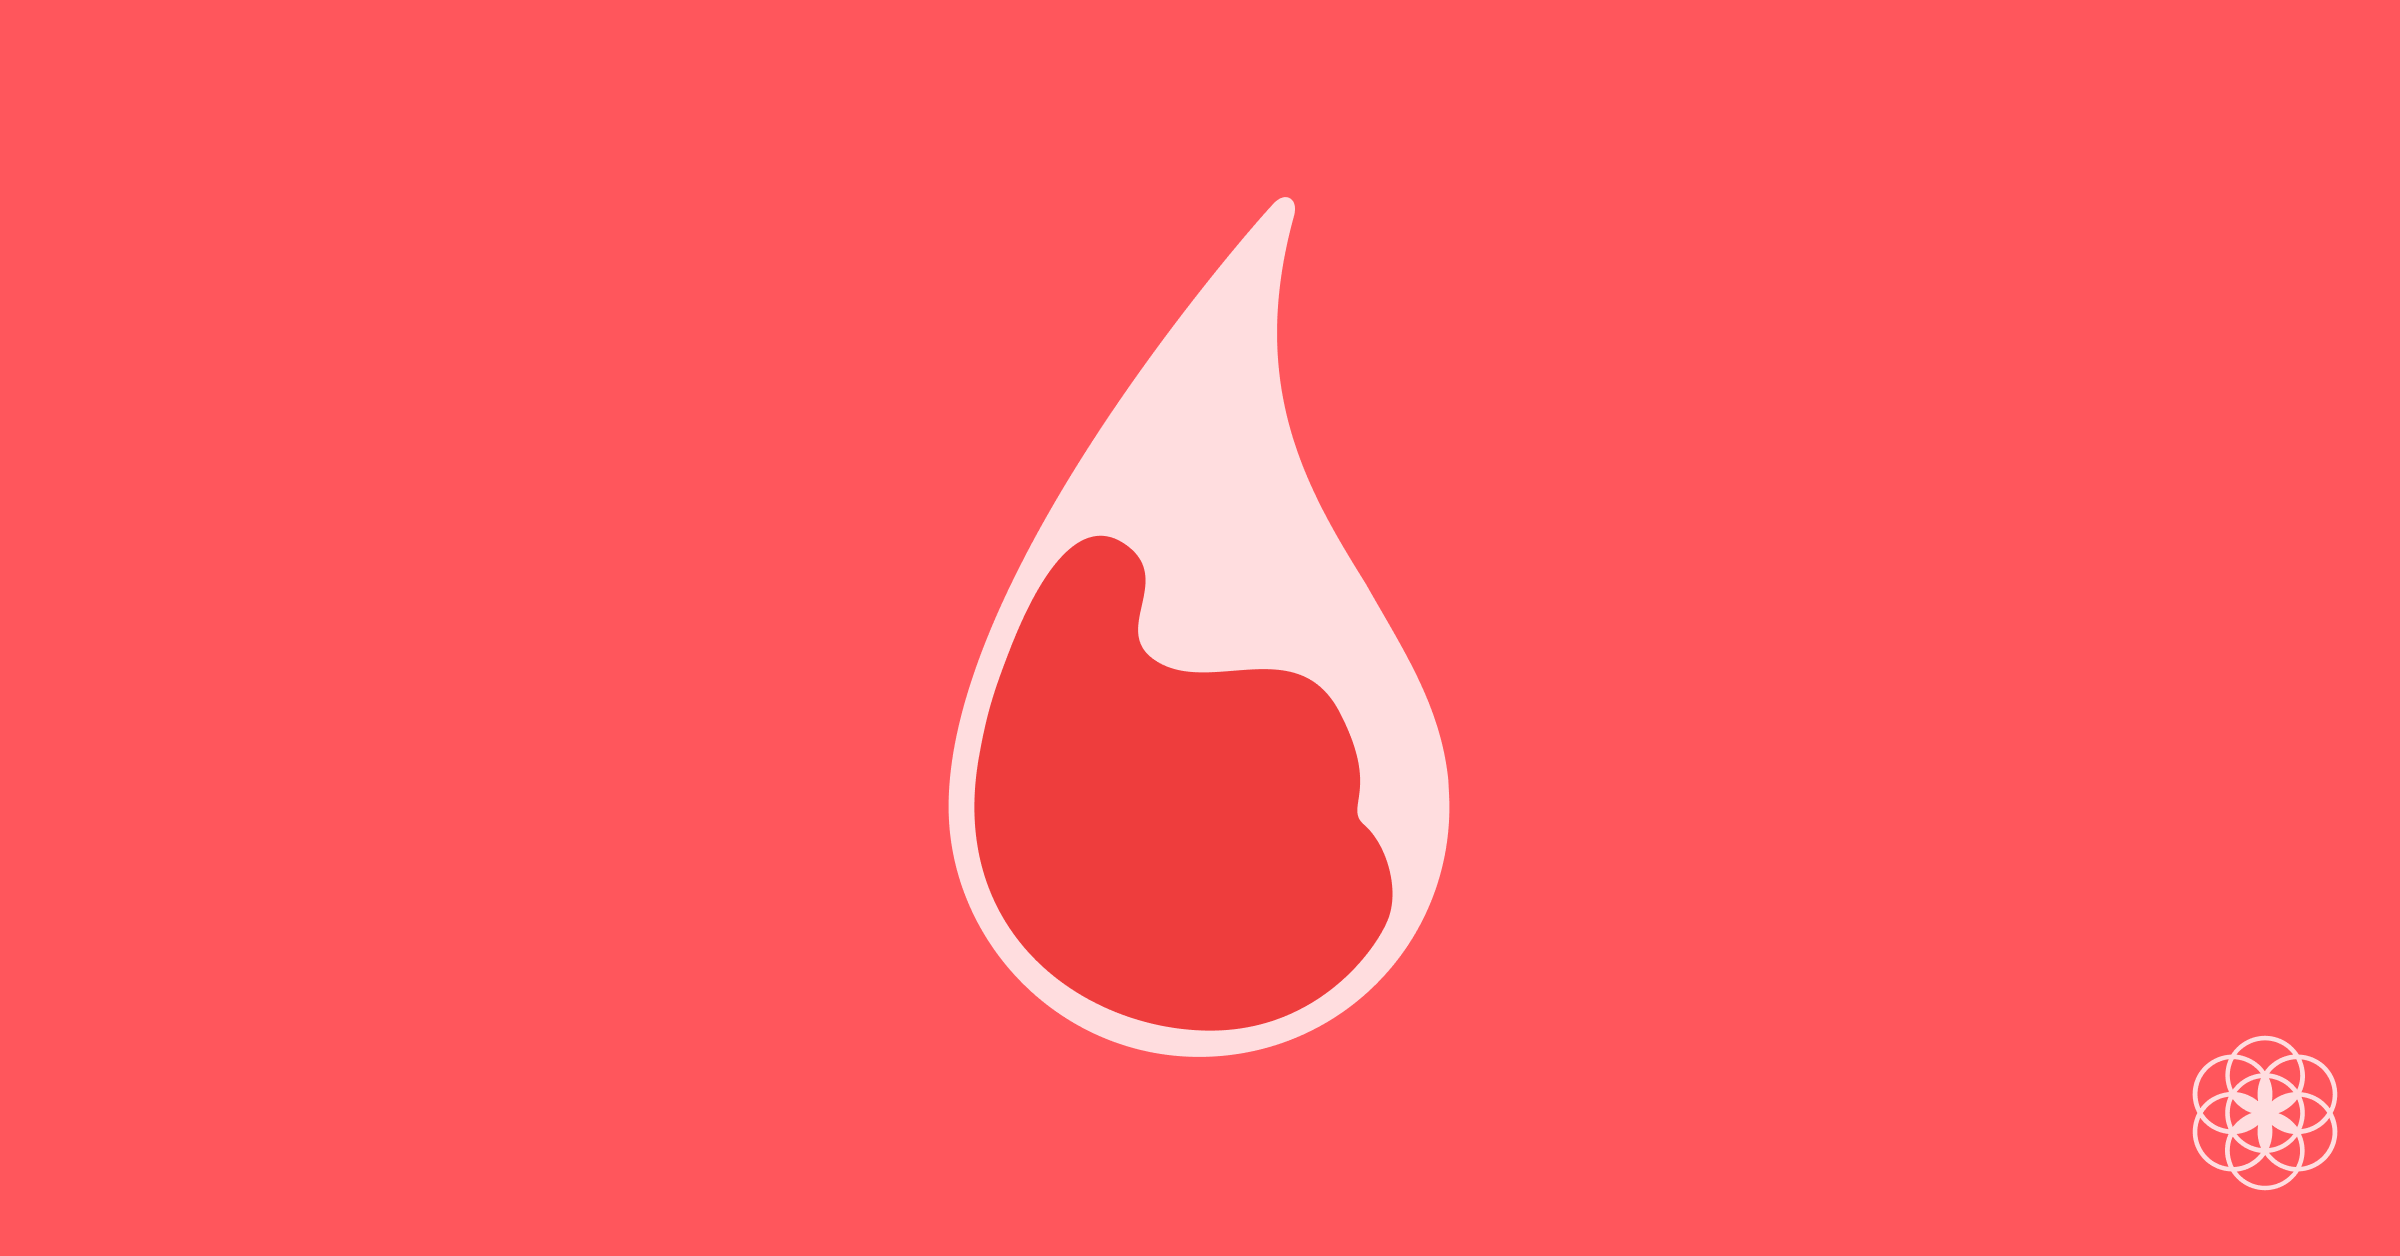 What Causes Blood Clots During Periods (Menstruation)?